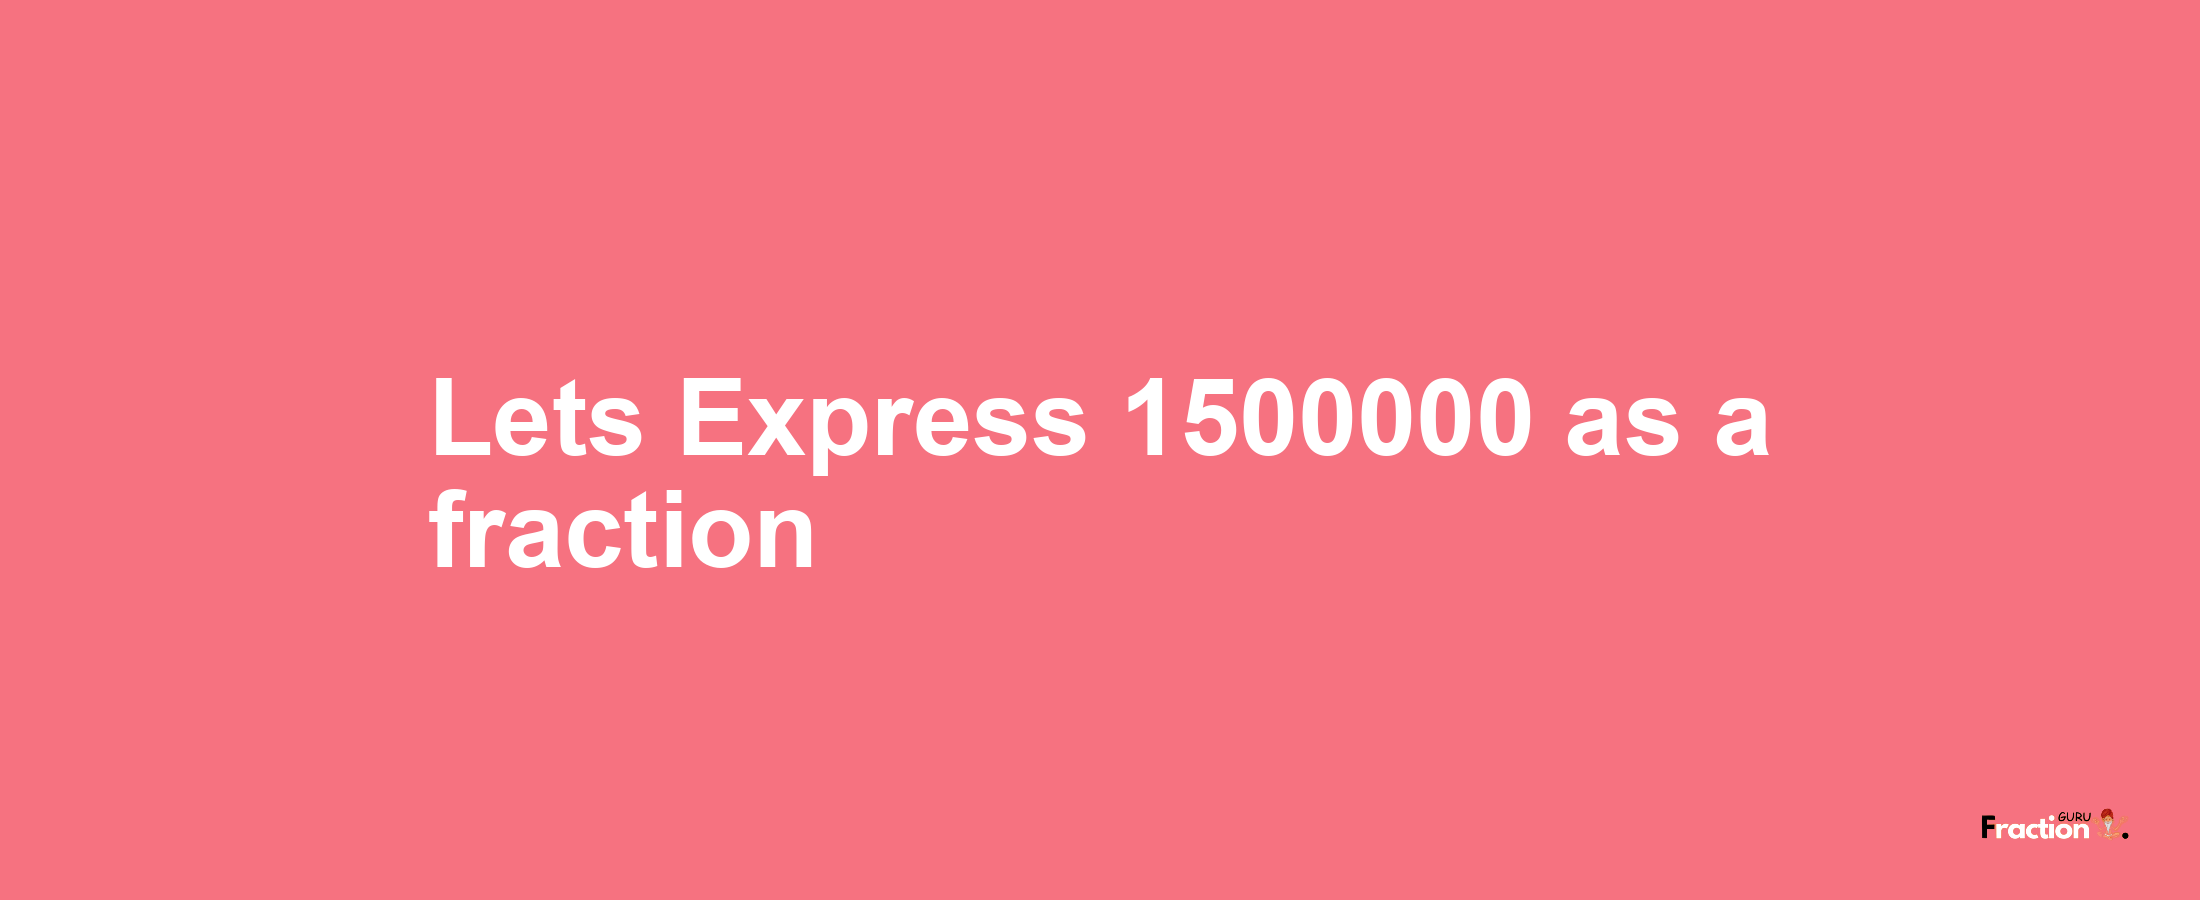 Lets Express 1500000 as afraction